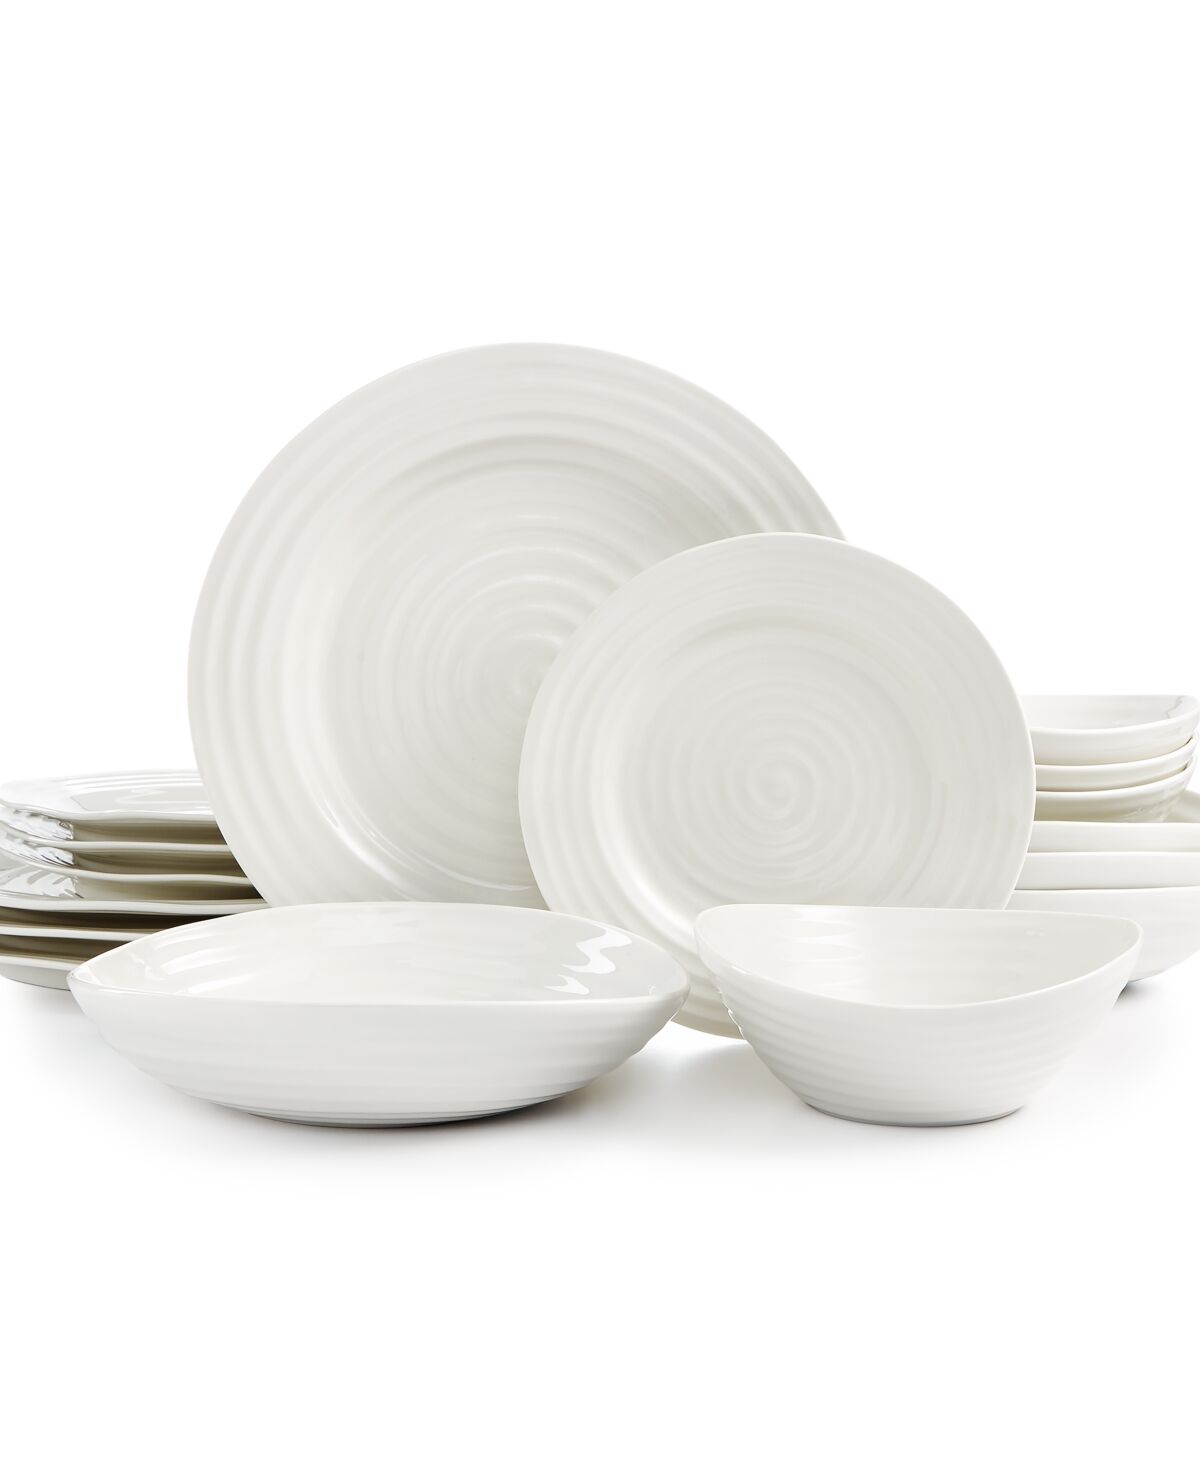 Portmeirion Sophie Conran White 16-Pc. Dinnerware Set, Service for 4, Created for Macy's - White